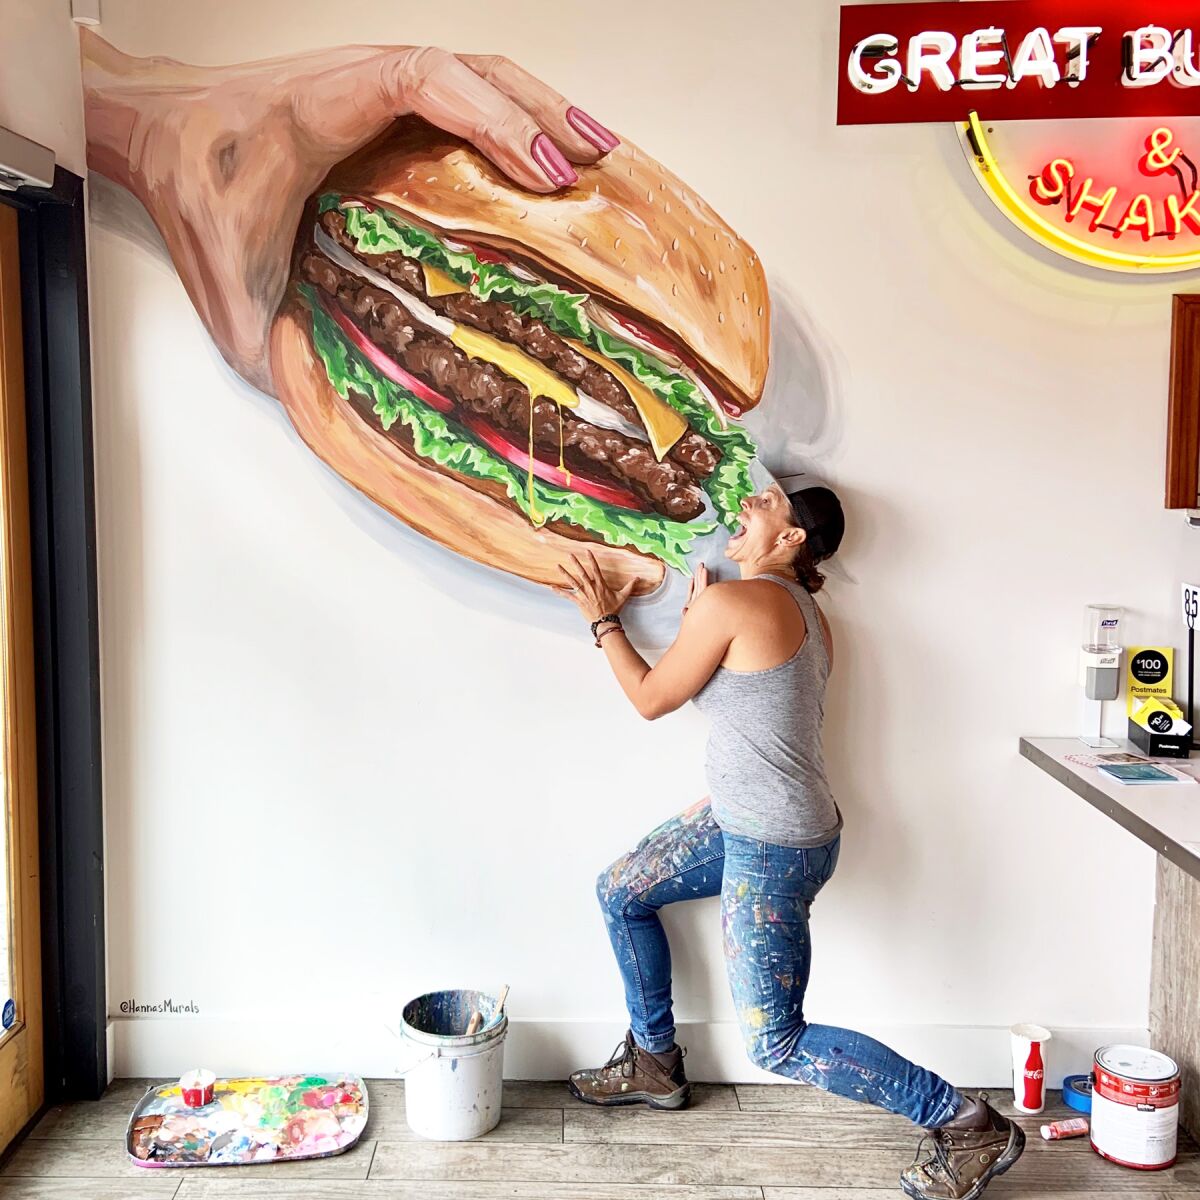 Hanna Daly with the oversized burger she painted at Biggie's Burgers, 4631 Mission Blvd.  It makes for great selfies.